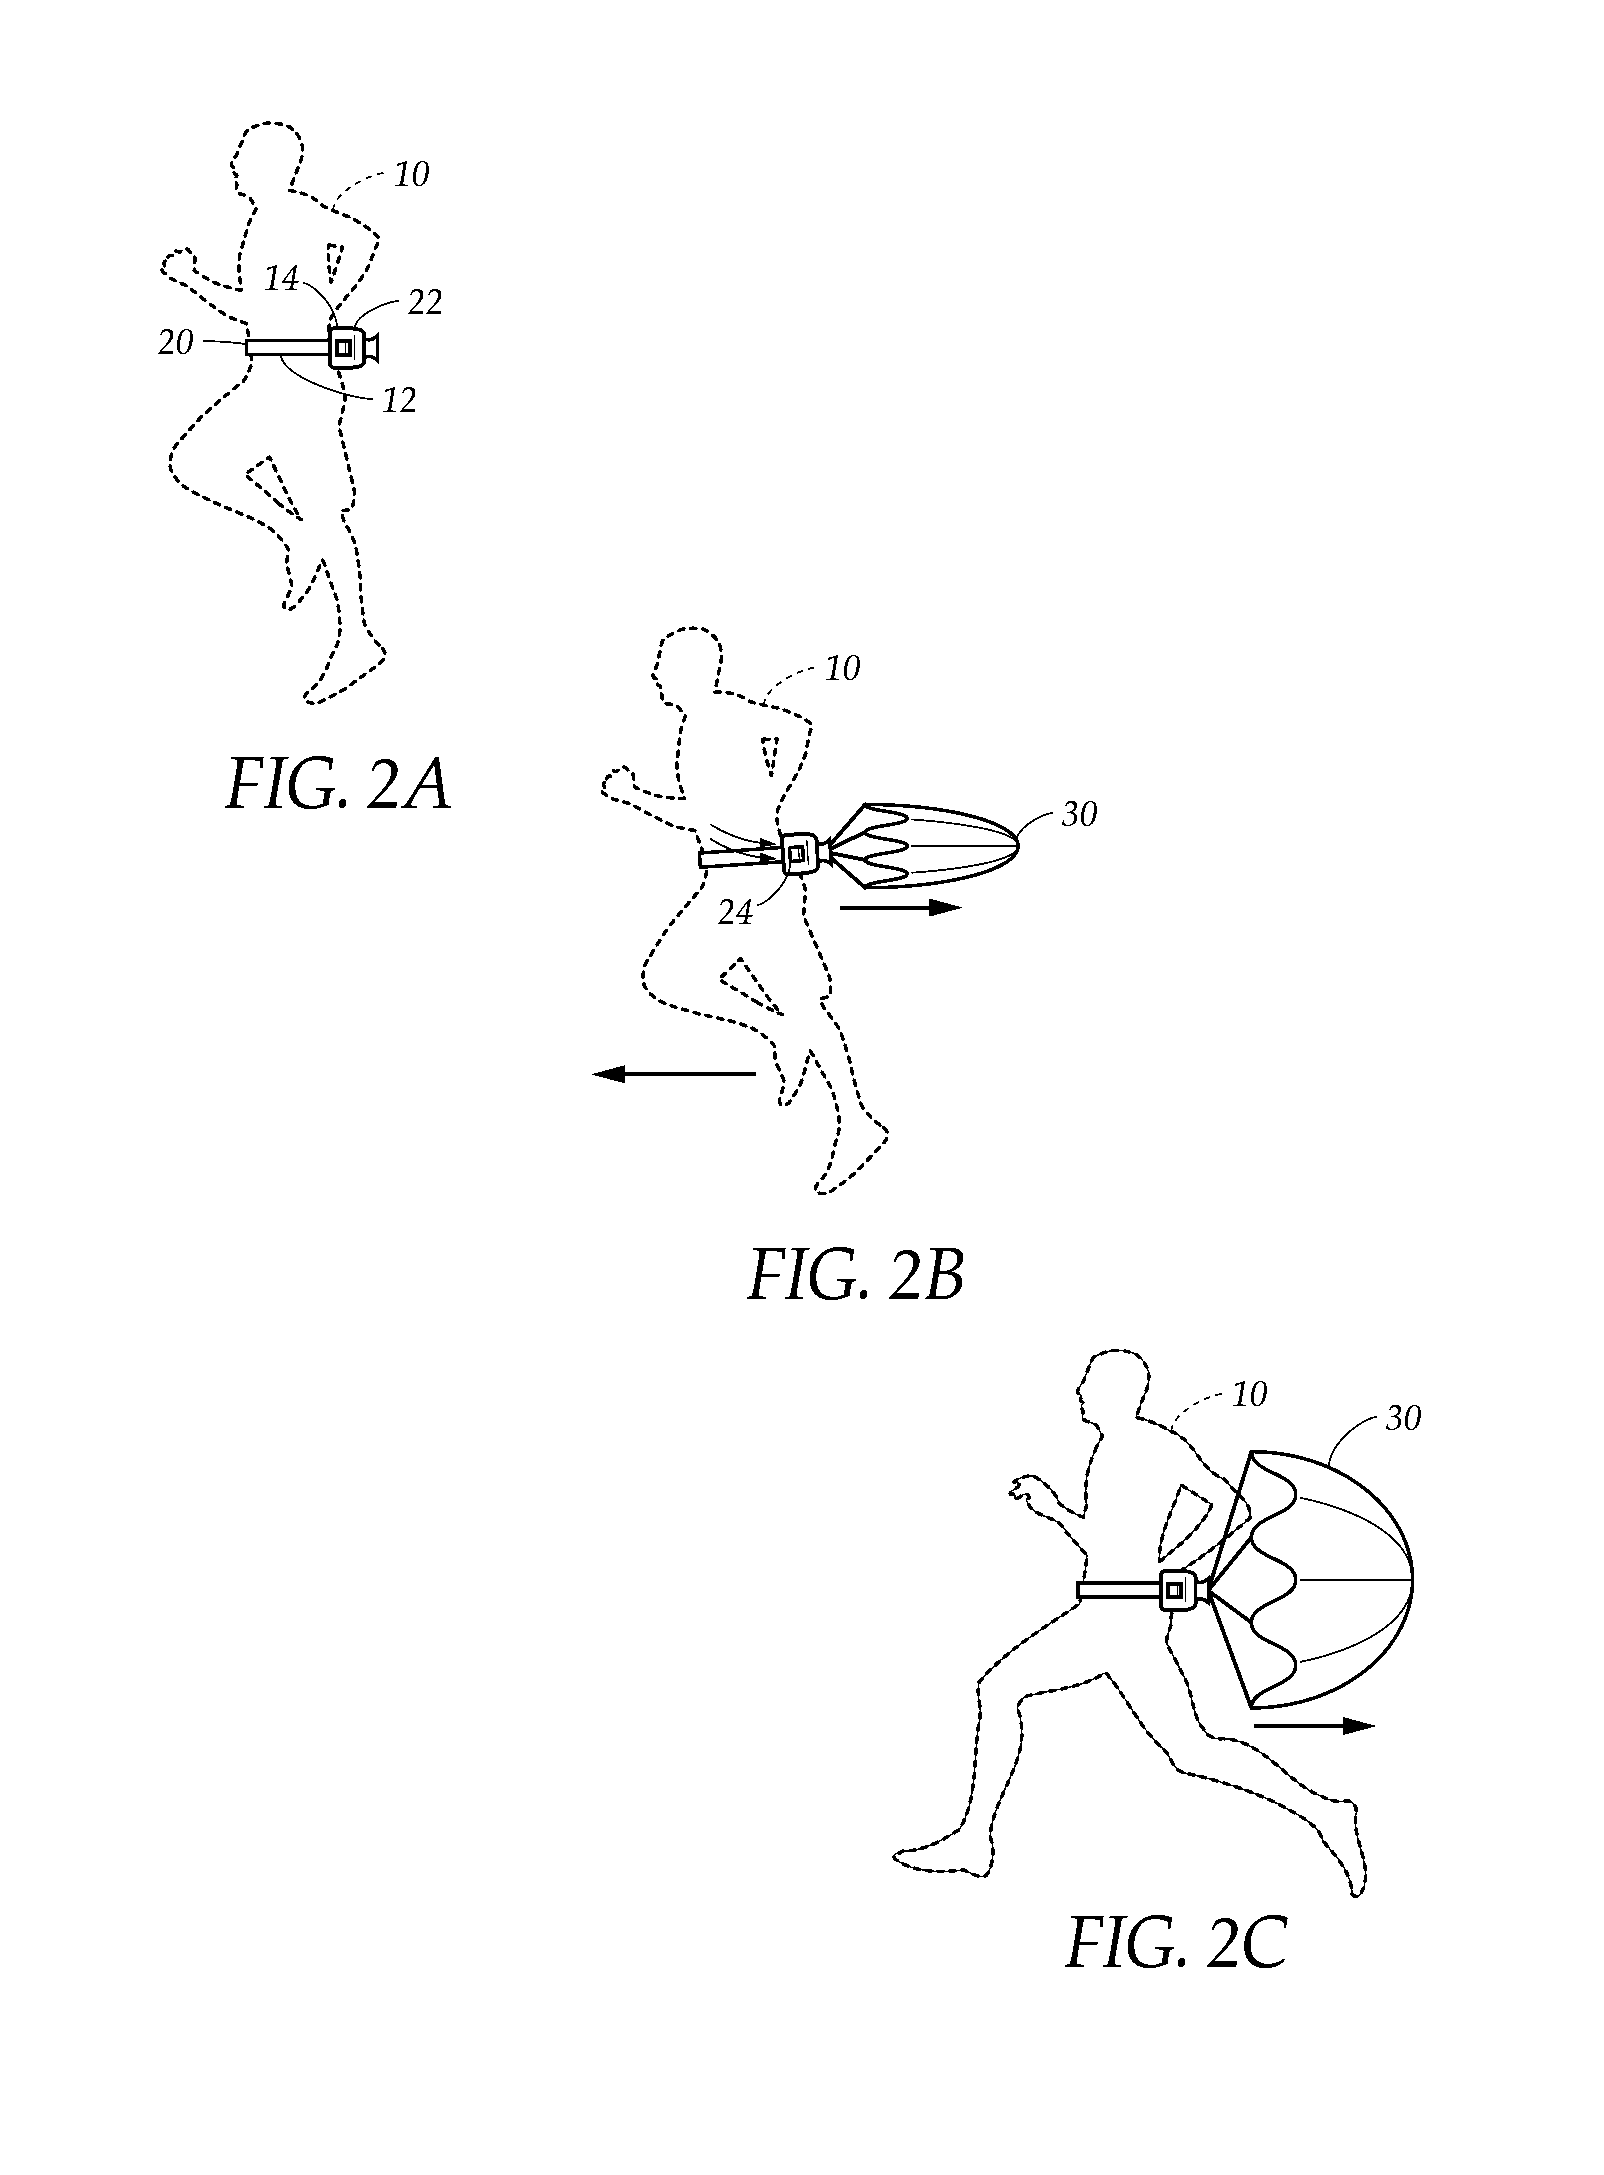 Waist-mounted parachute deployment and retracting system